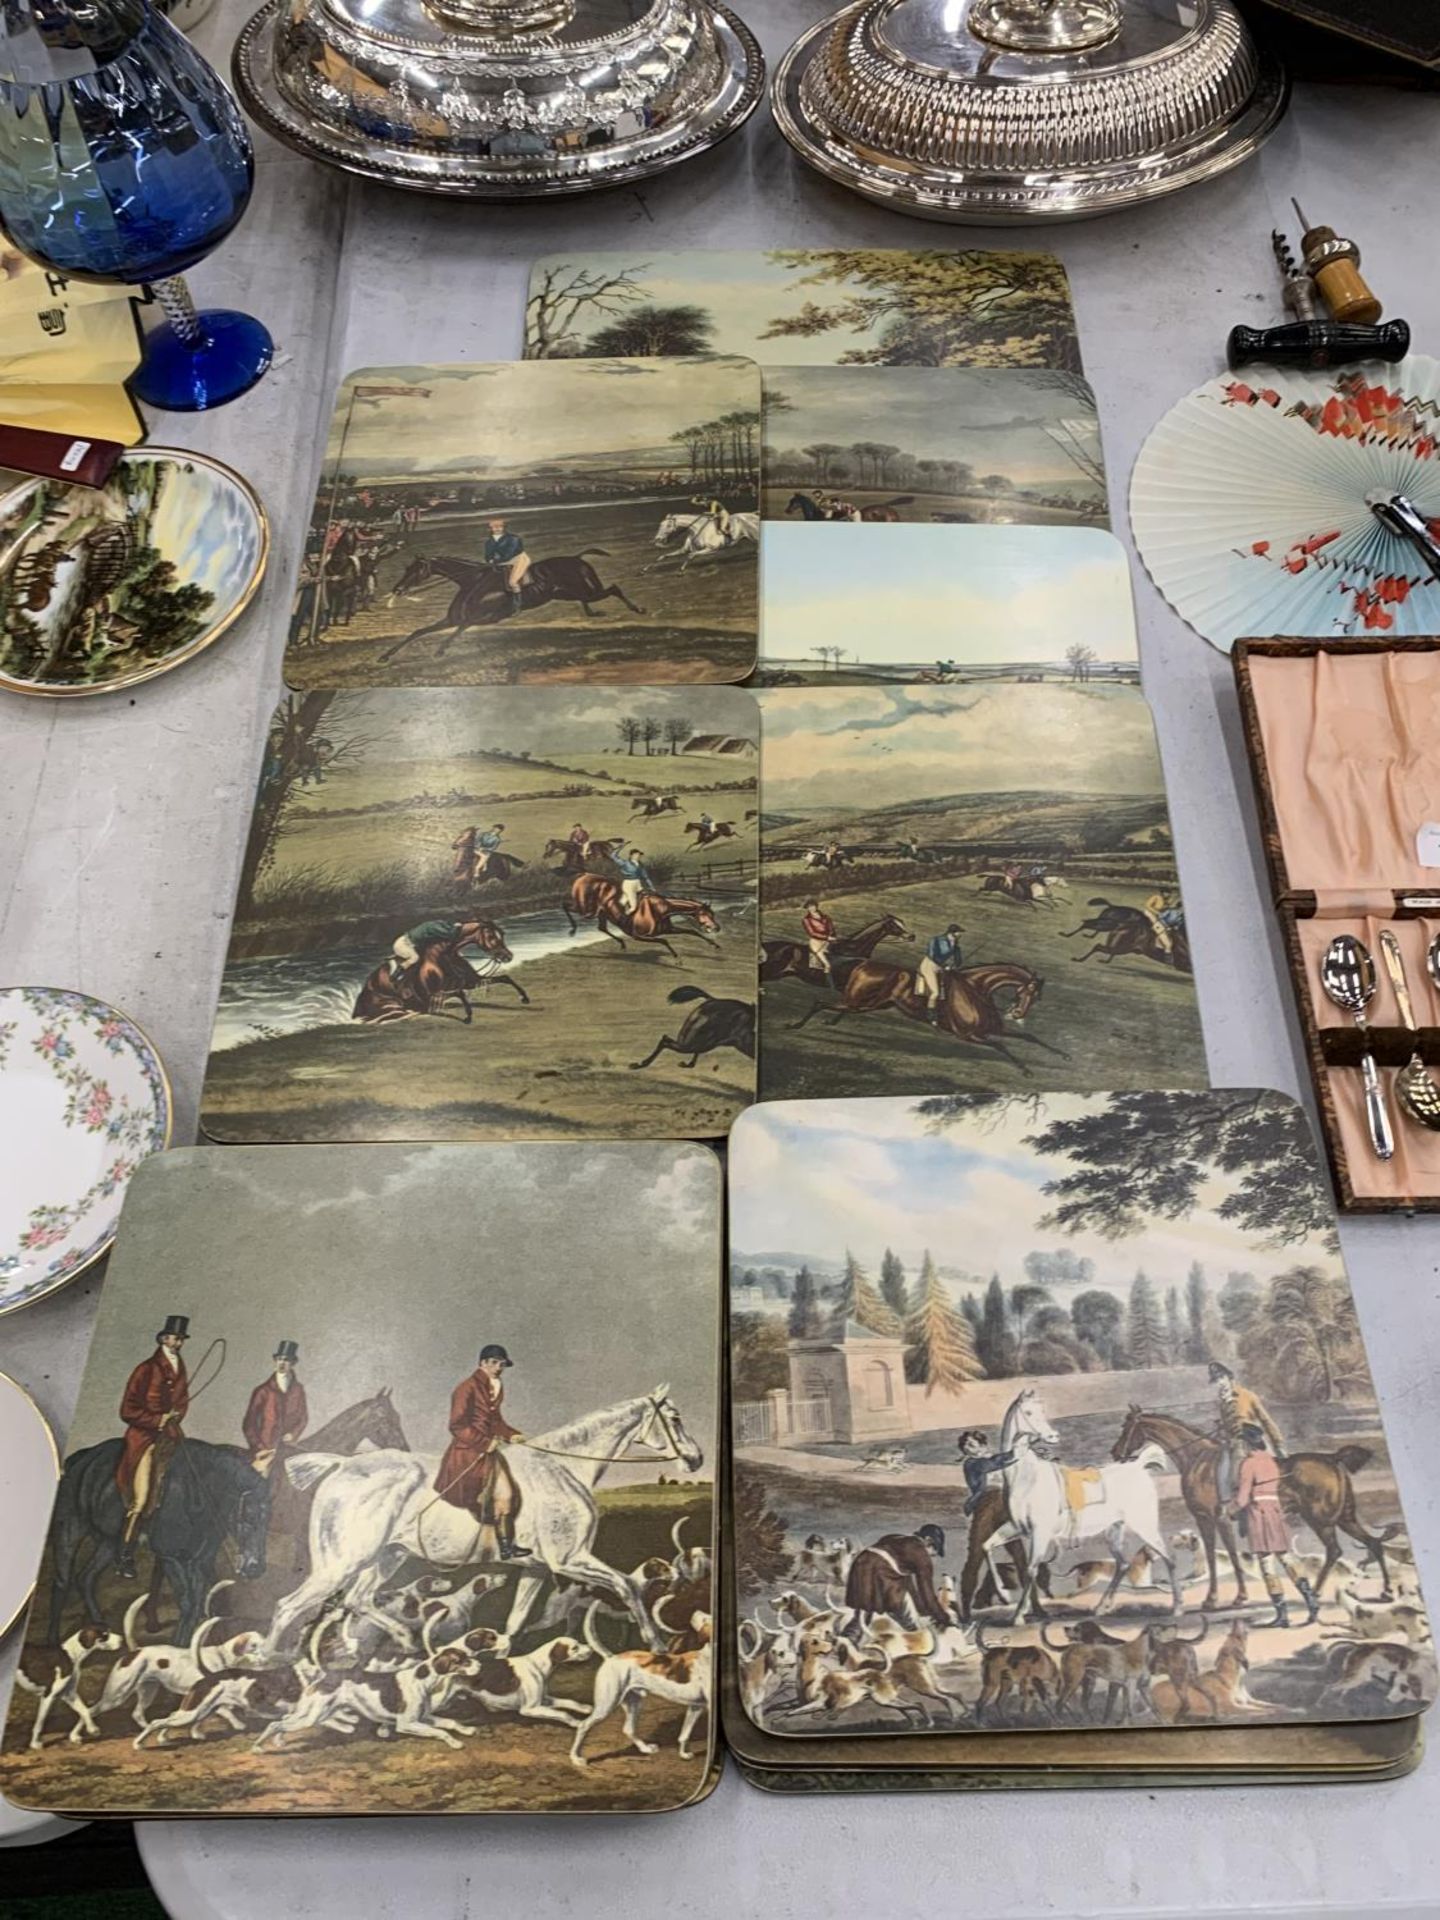 A LARGE QUANTITY OF VINTAGE HUNTING RELATED PLACEMATS